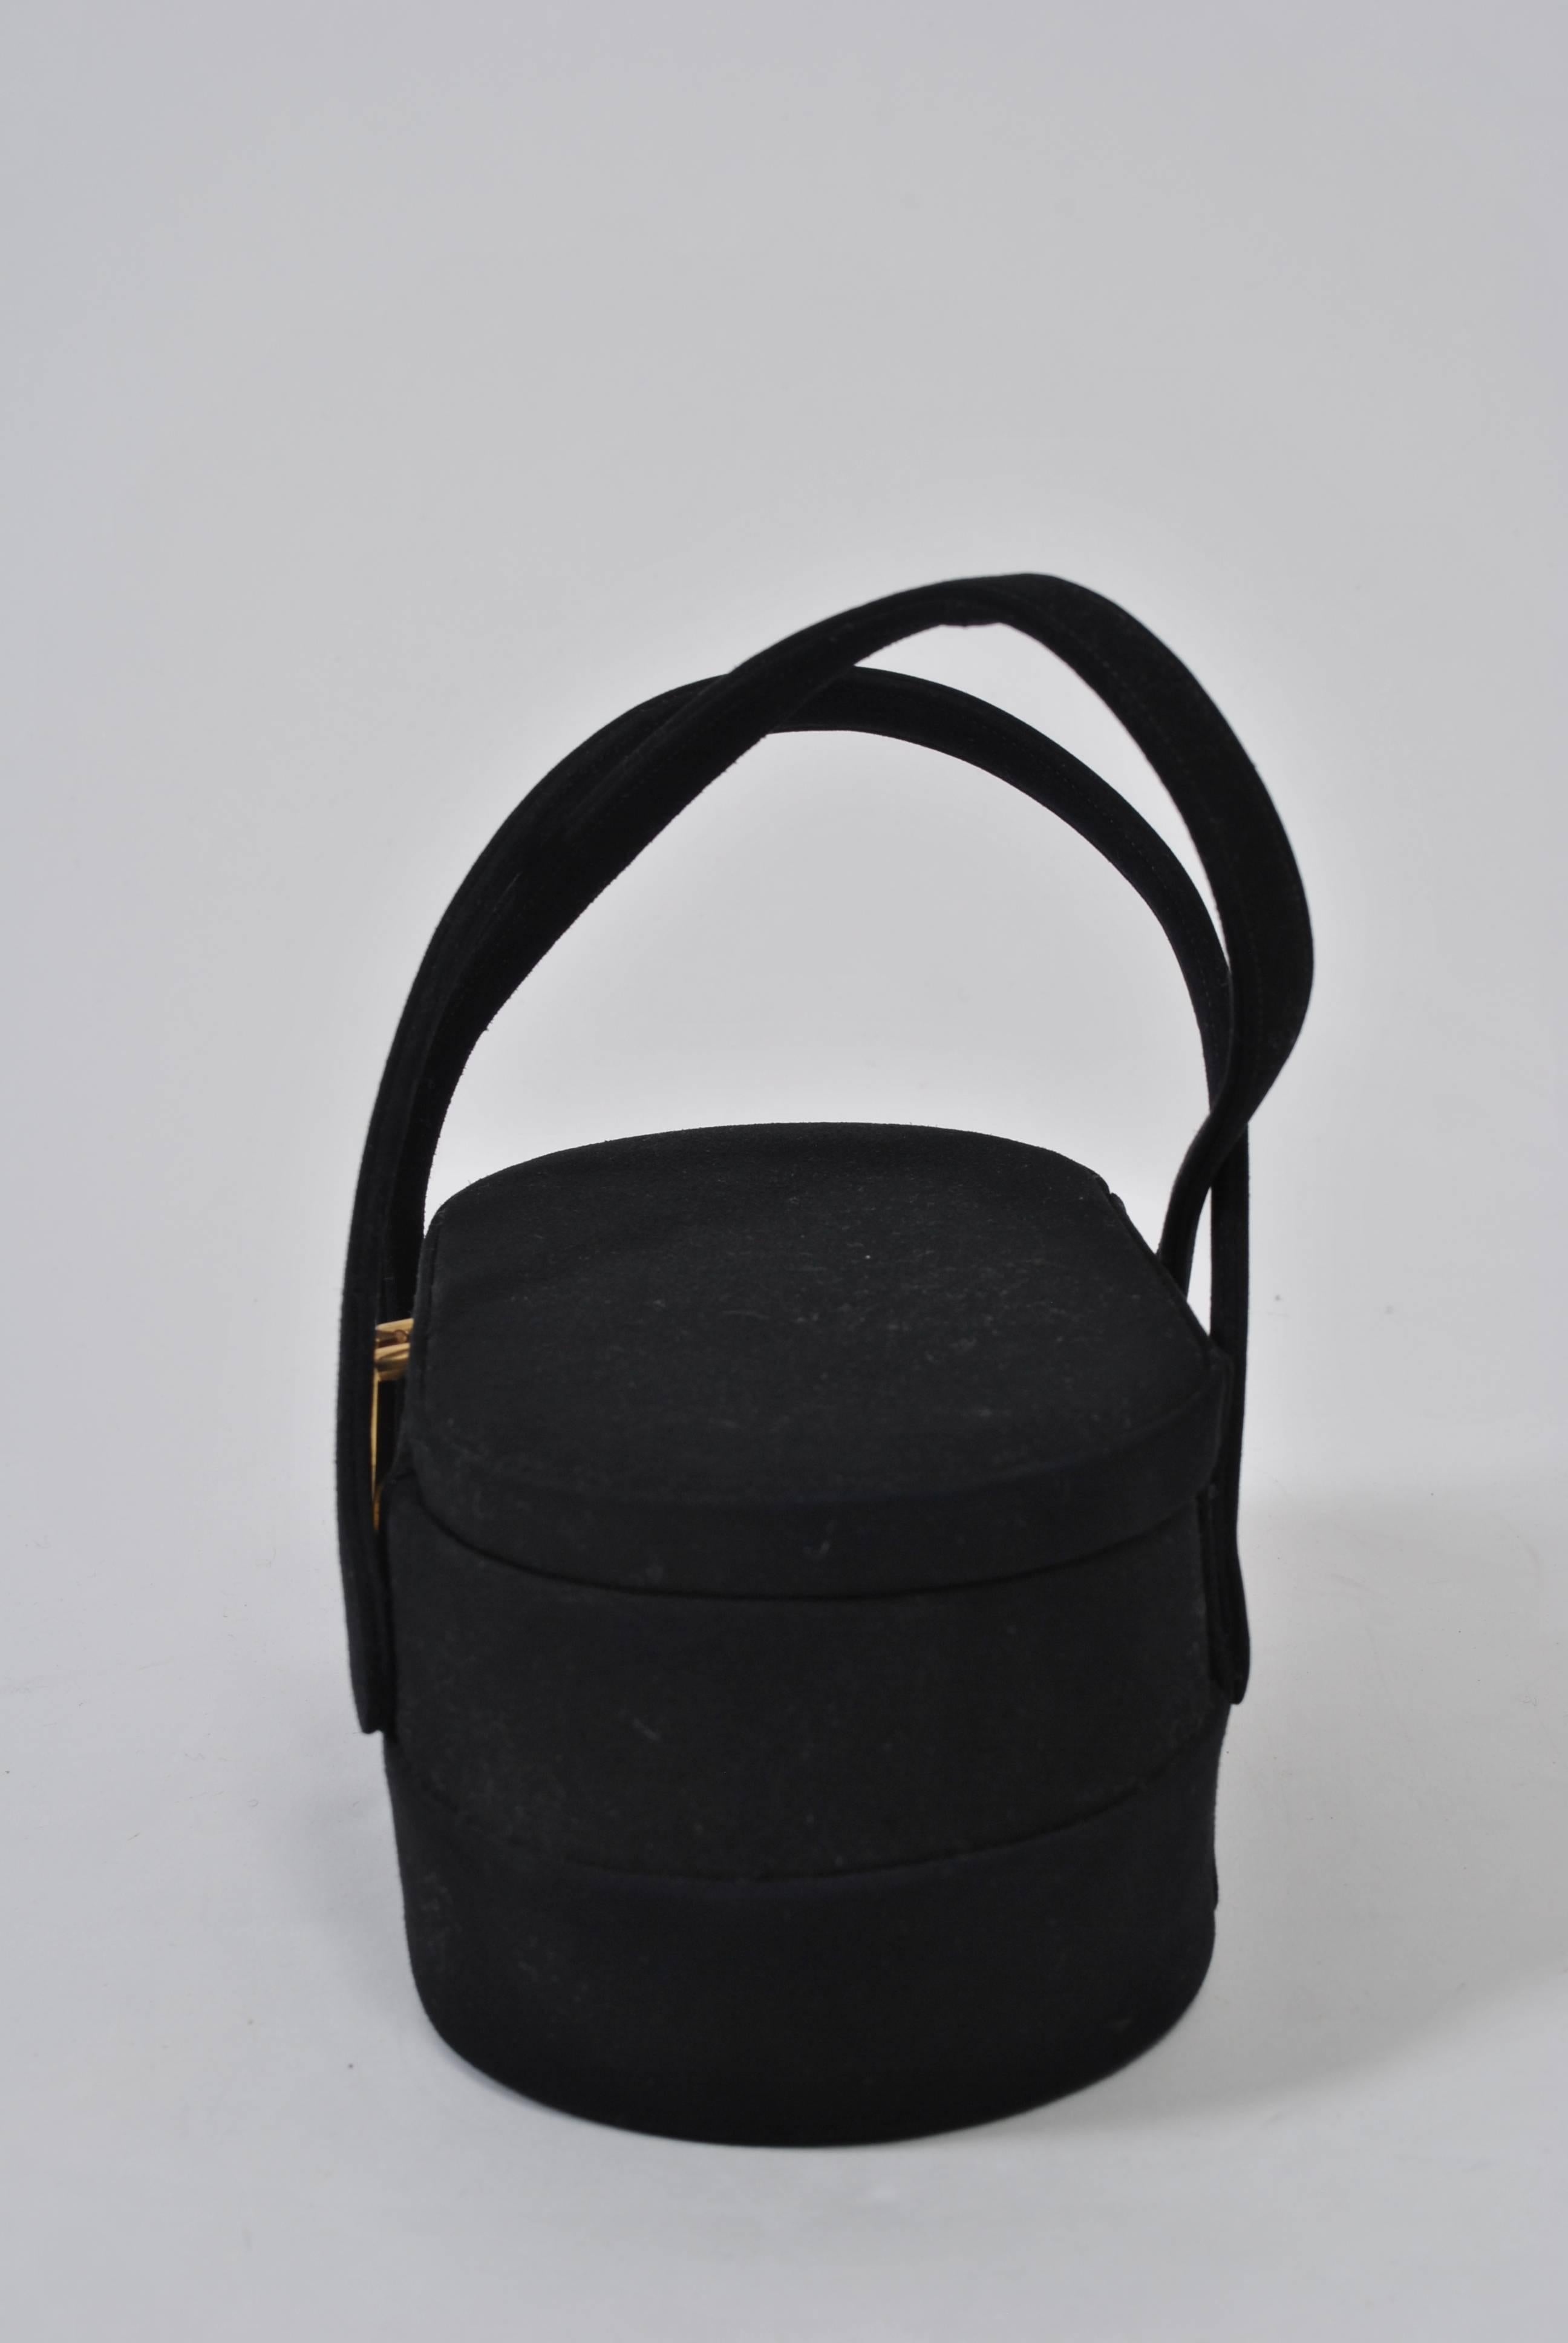 Box-shaped handbags were extremely popular during the 1950s and '60s and their unique styling is evident n this example from Coblentz. In black suede, the bag has an oval shape that is widest at its waist, sports two handles and as its only